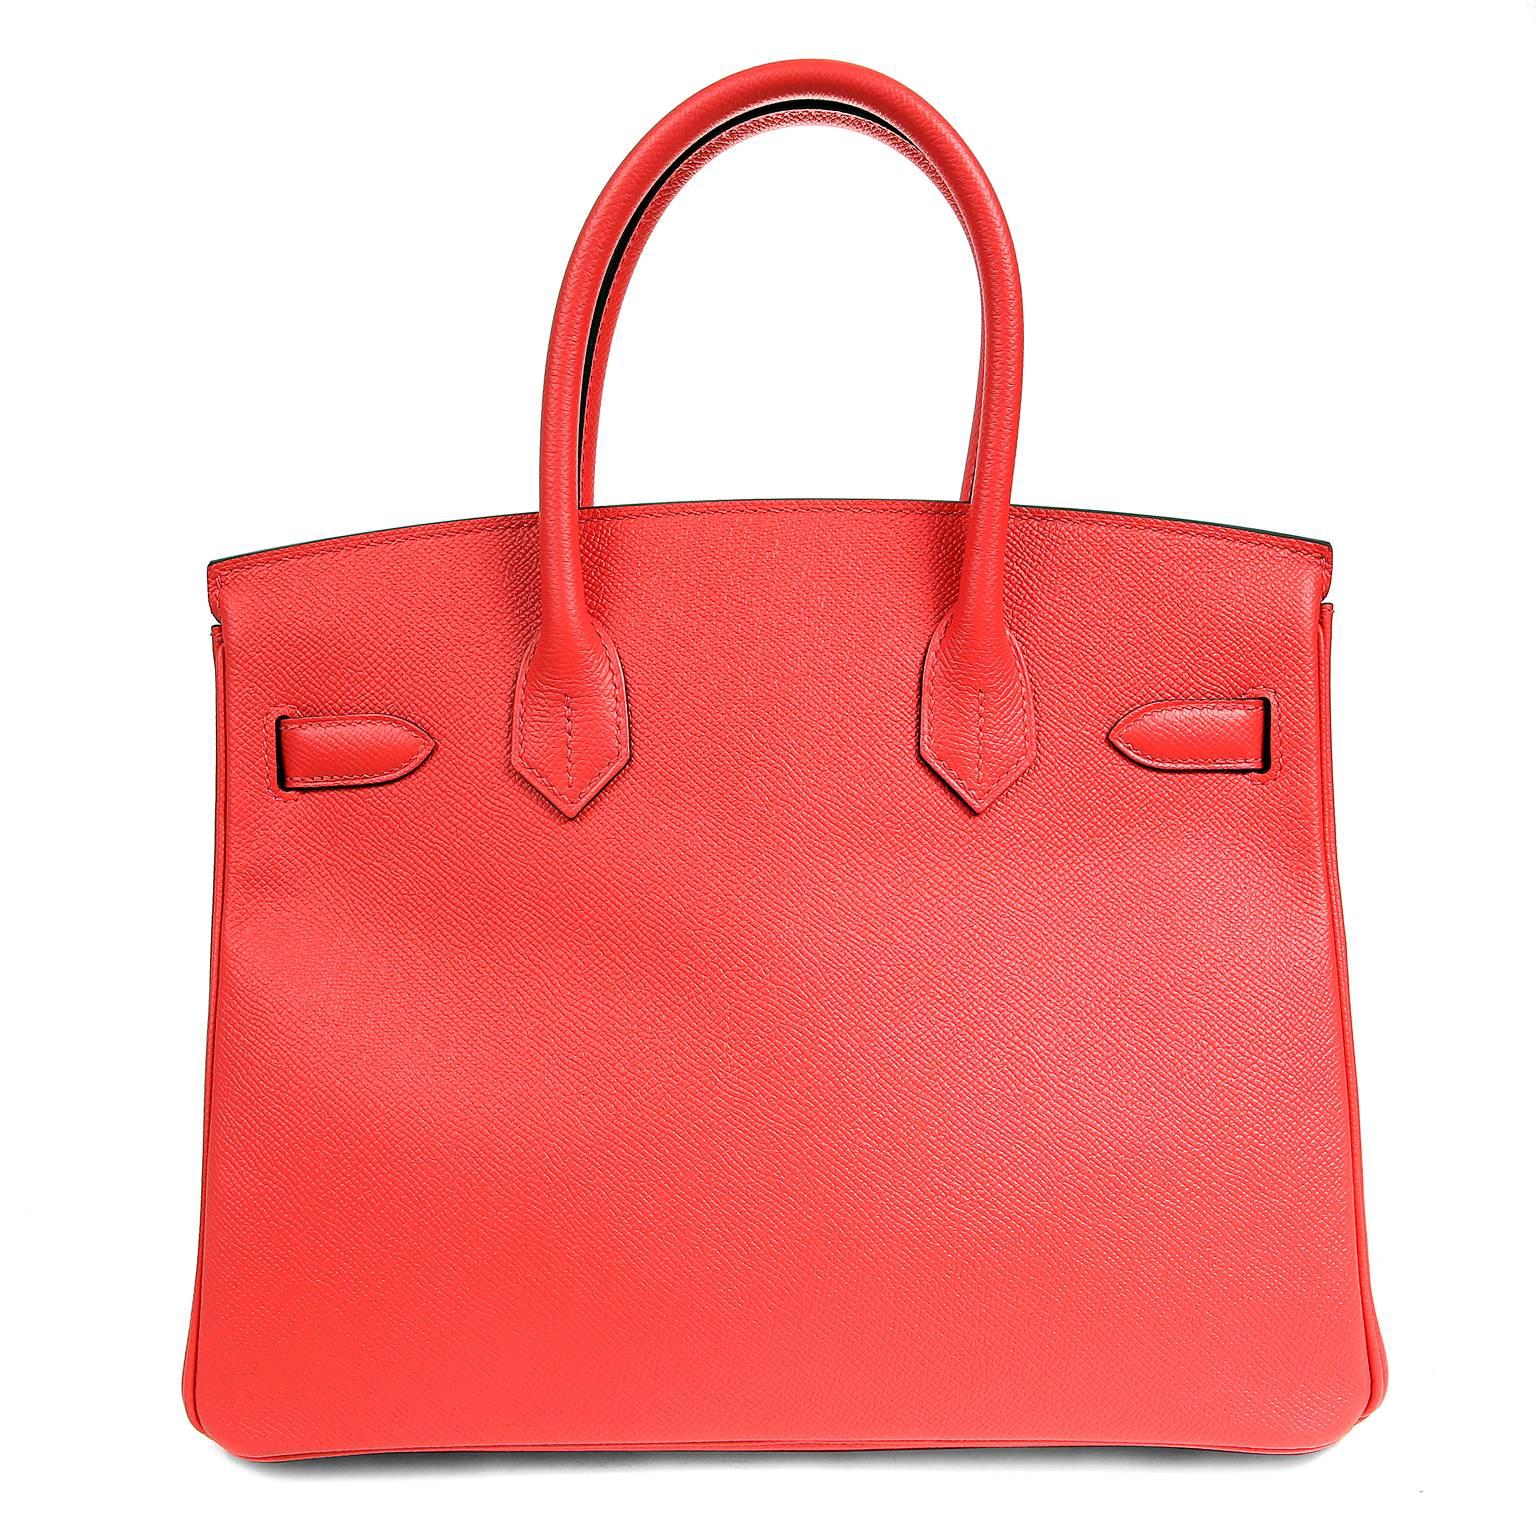 Hermès Rose Jaipur Epsom 30 cm Birkin- PRISTINE, Never Carried.
The protective plastic is still intact on the hardware.    Considered the ultimate luxury item, the Hermès Birkin is stitched by hand. Waitlists are commonplace.   Rose Jaipur, an